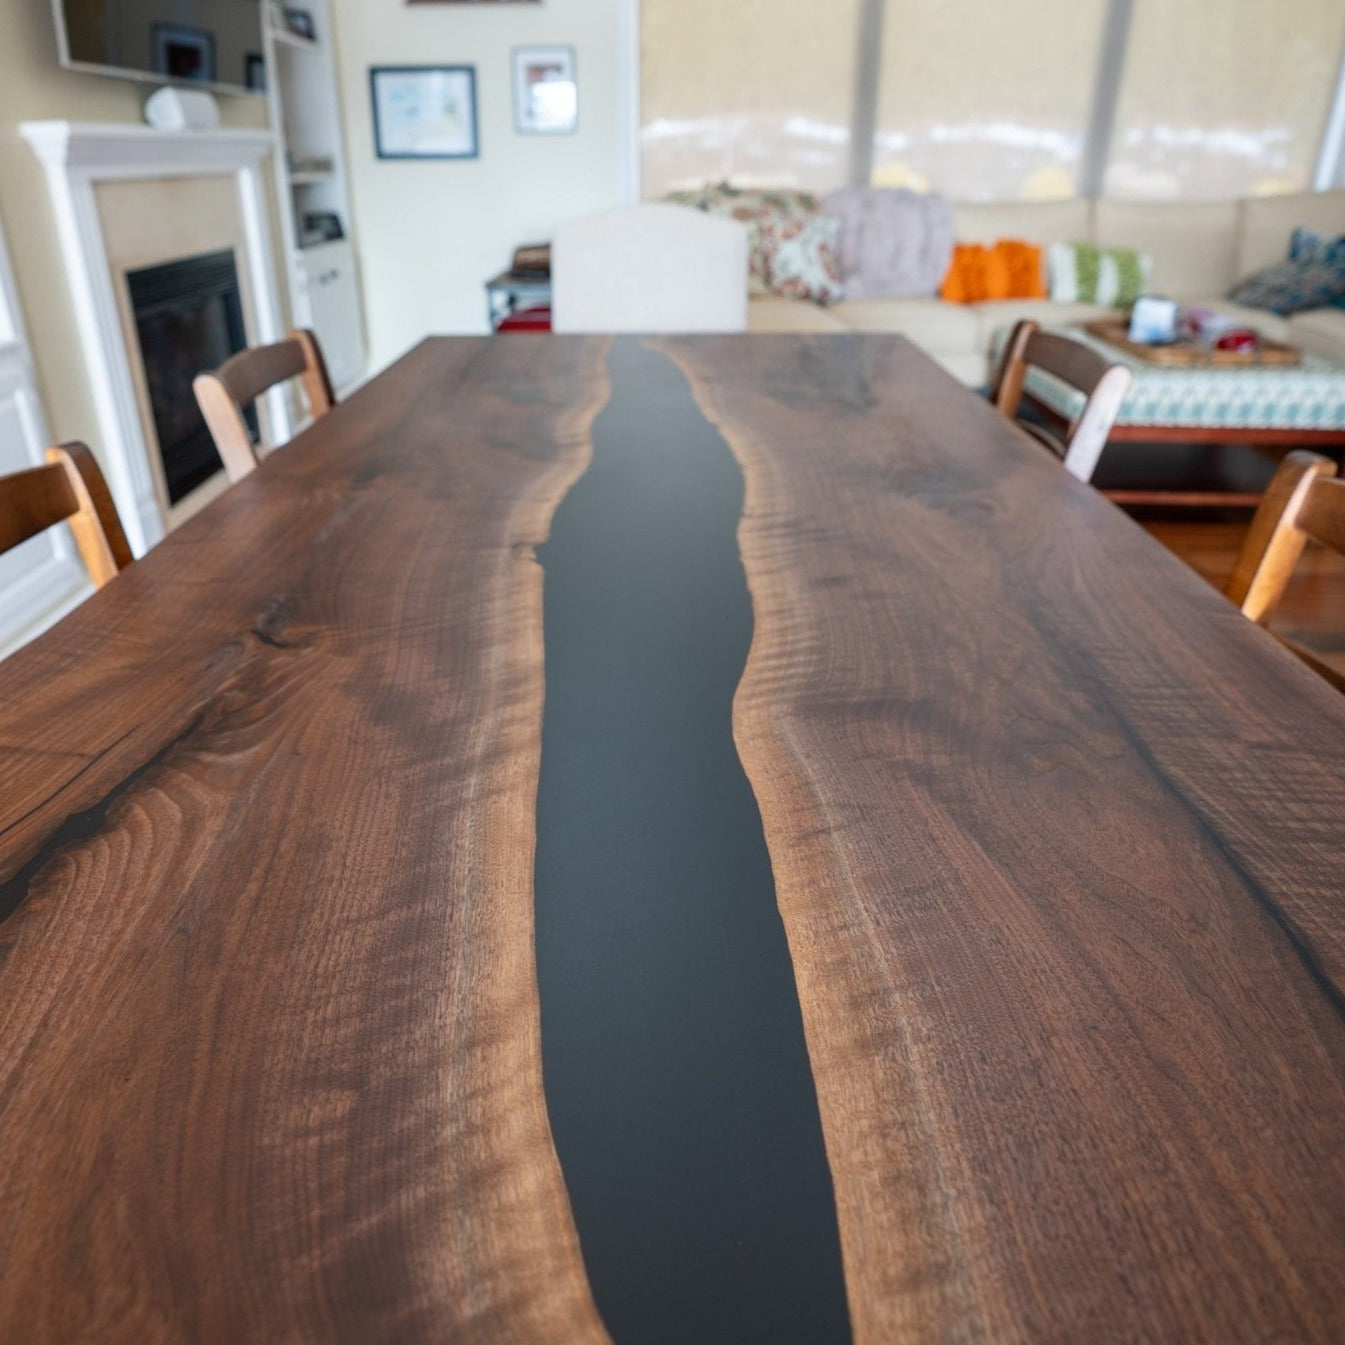 New Epoxy Dining Tables , #clearepoxytable #walnutdiningtable #epoxydi, Dining Table